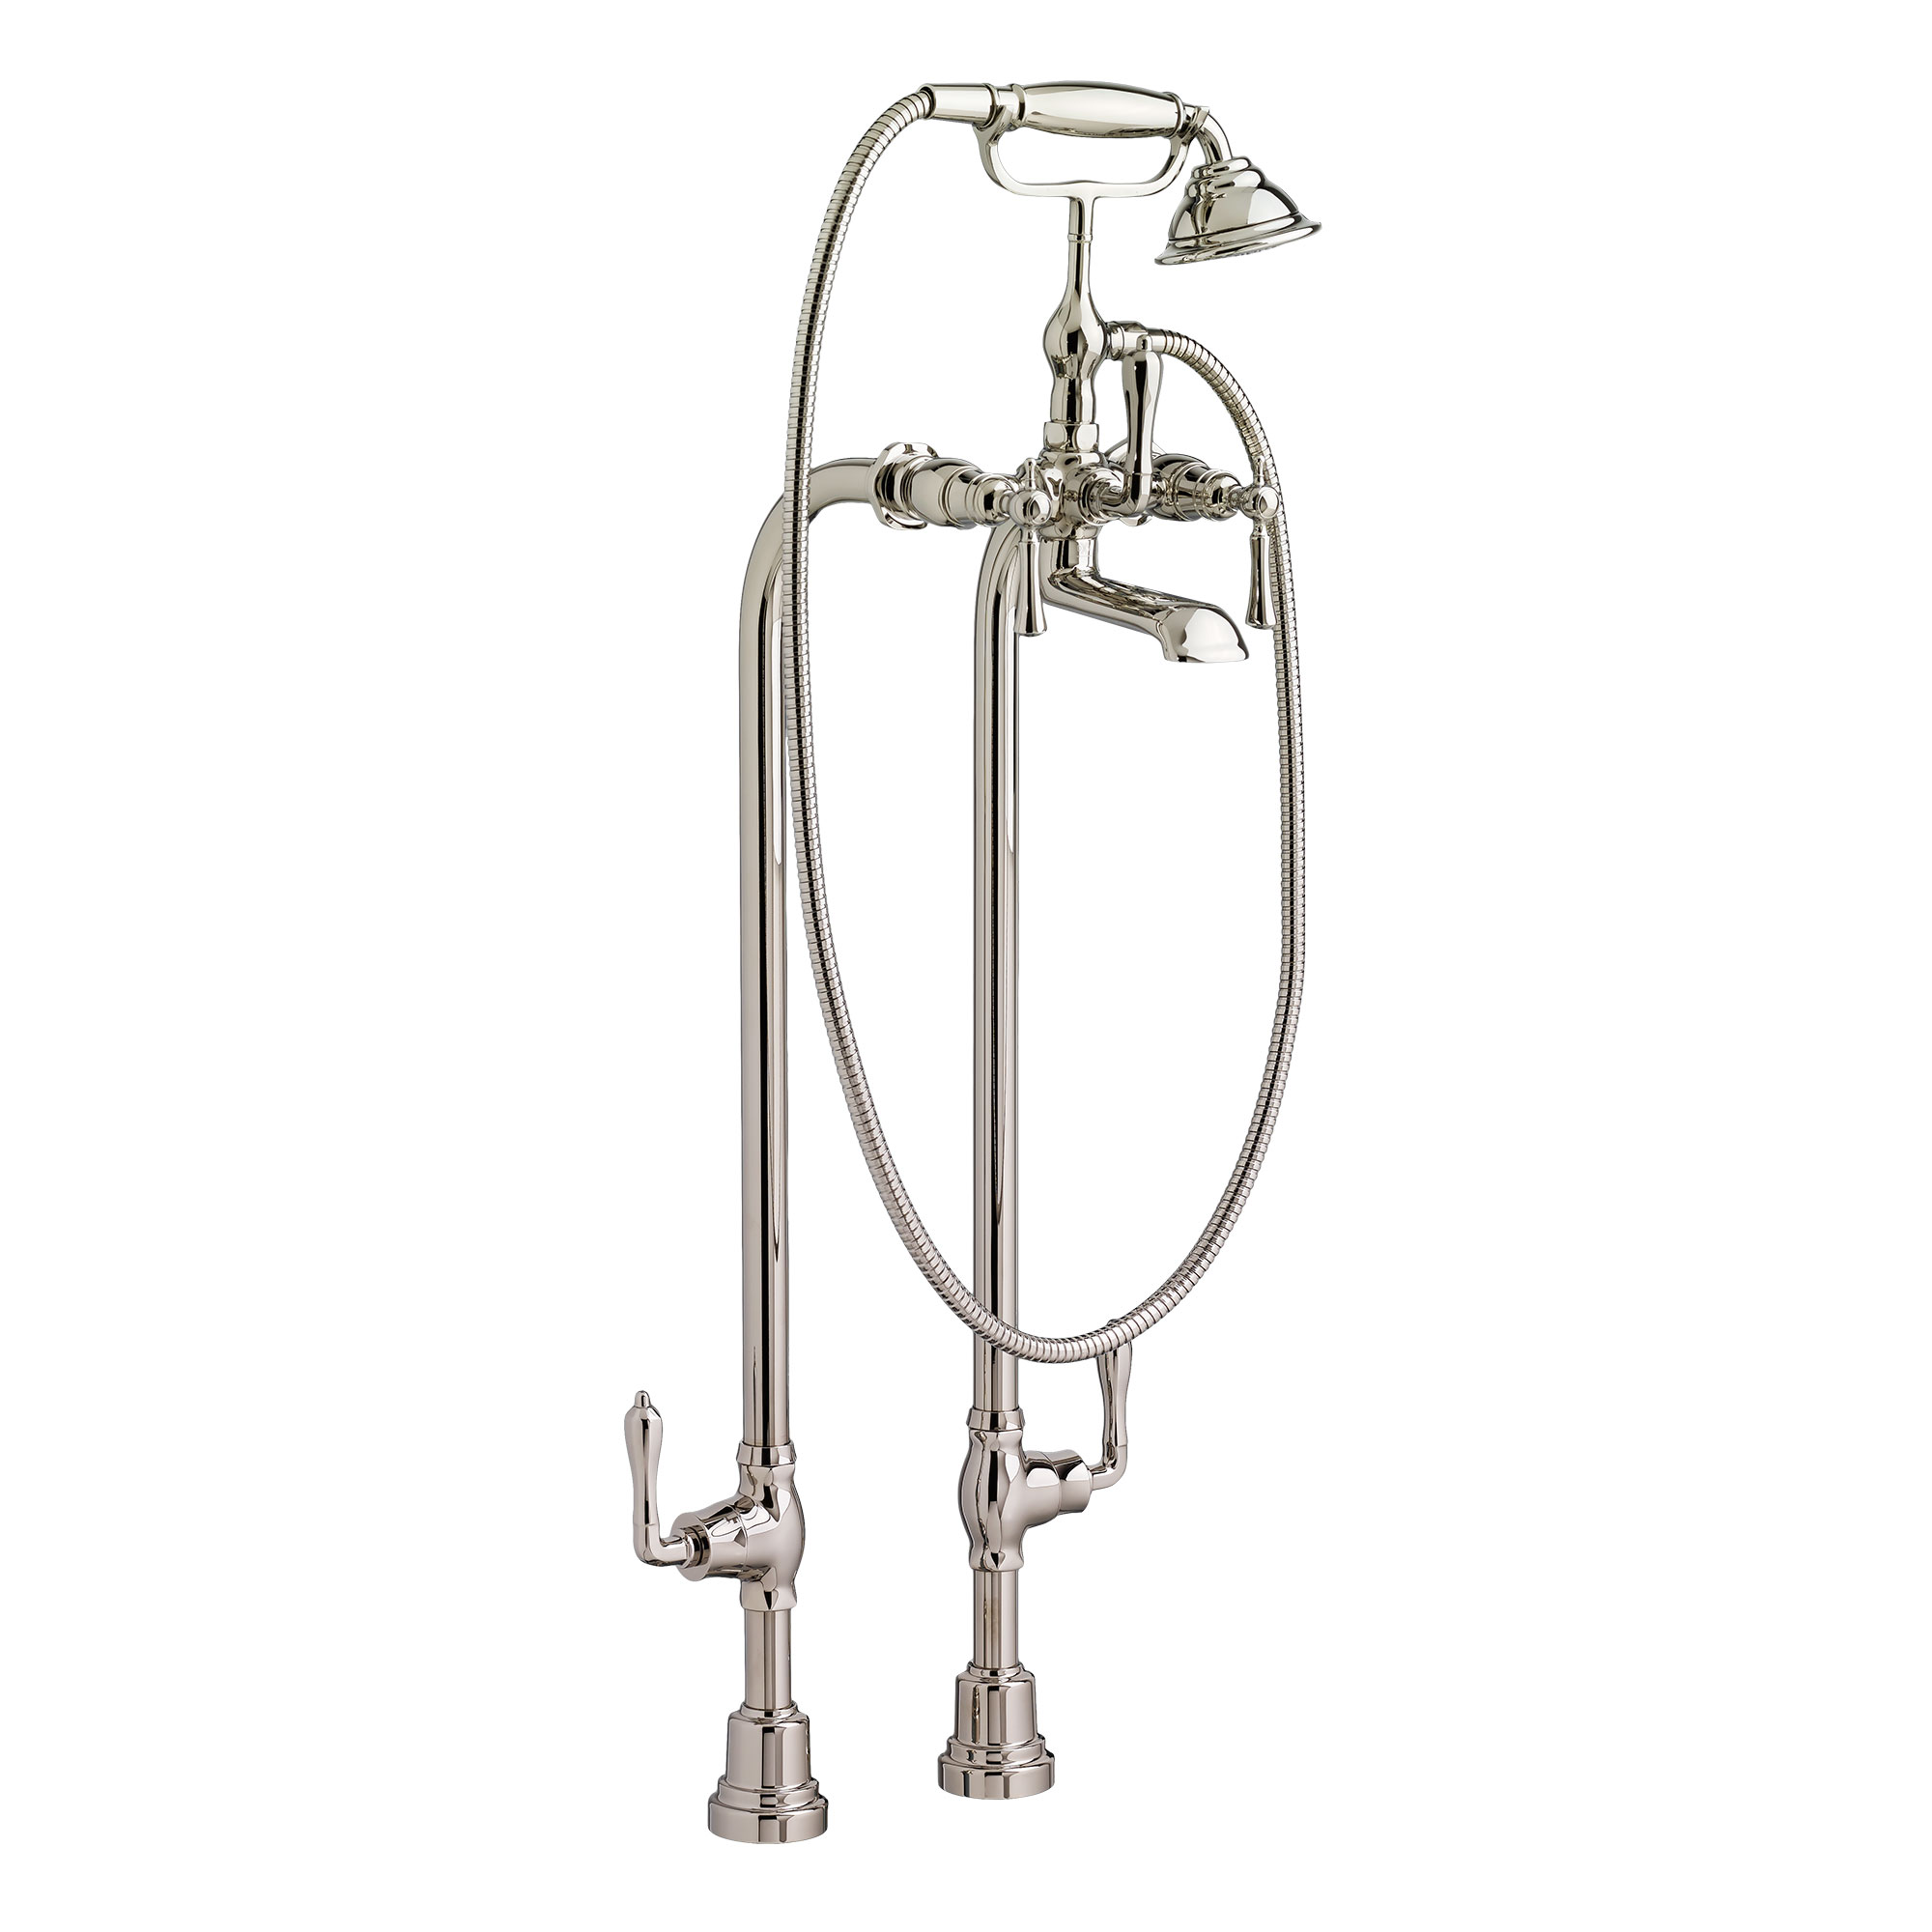 Transitional Floor-Mounted Bathtub Faucet With Randall Lever Handles